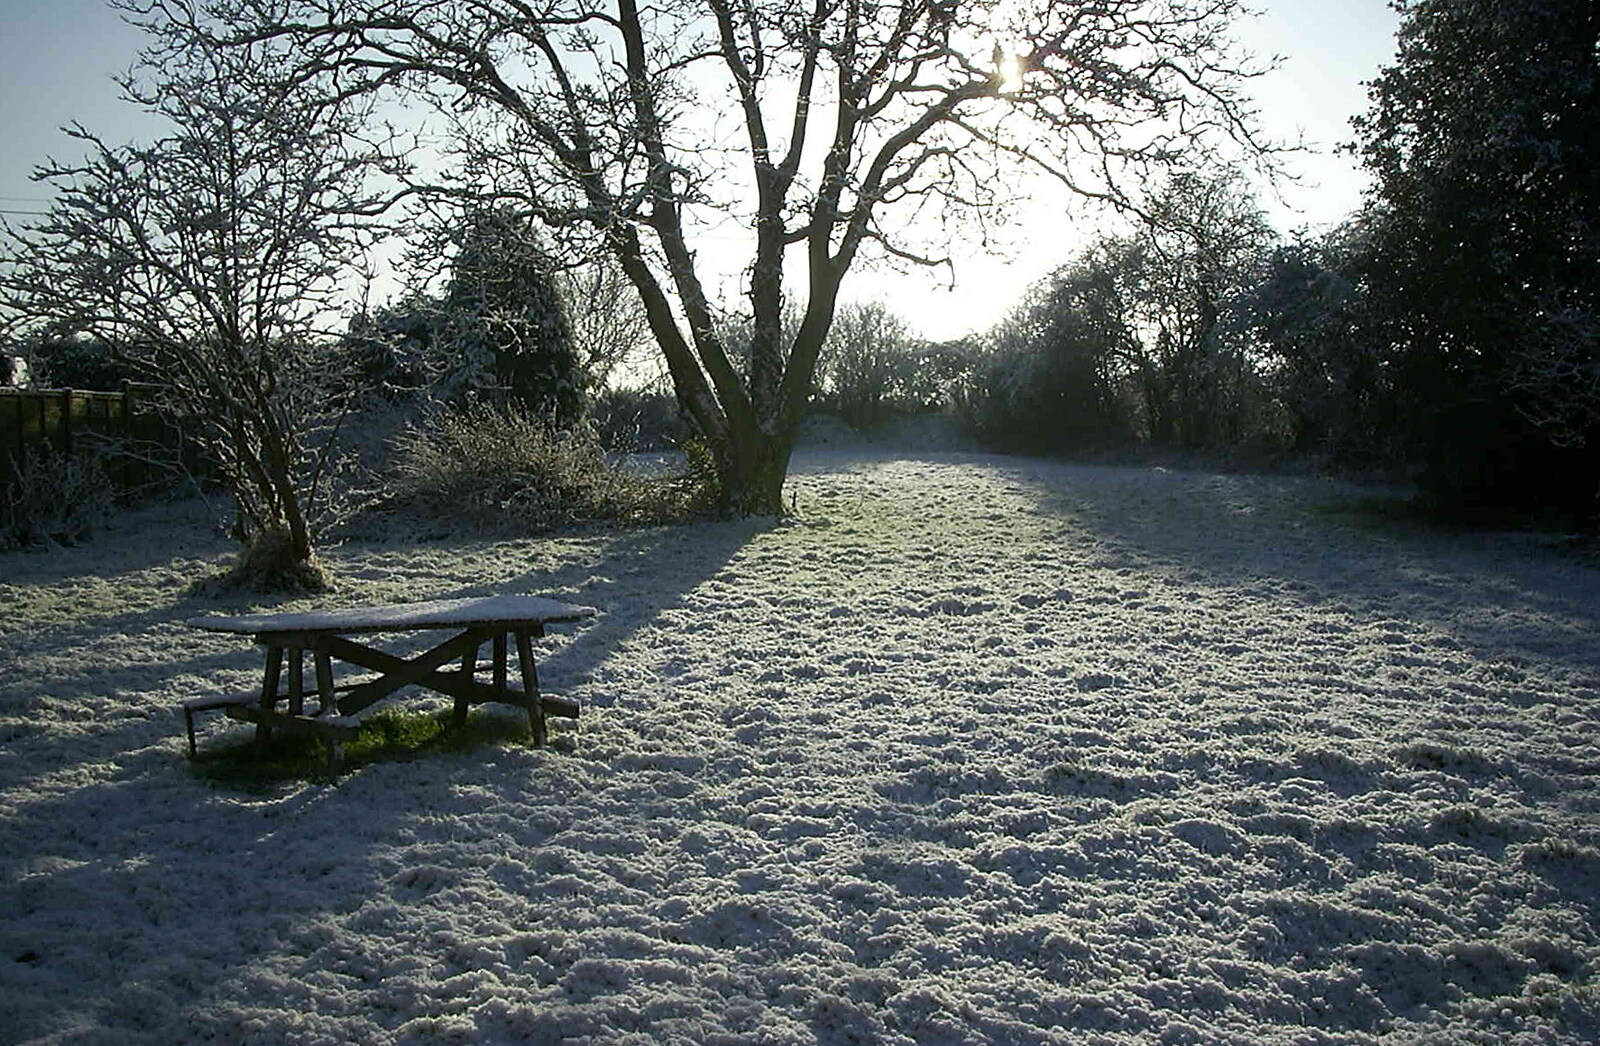 The back garden from The House in Snow and a Carburettor, Brome, Suffolk - 20th December 2002